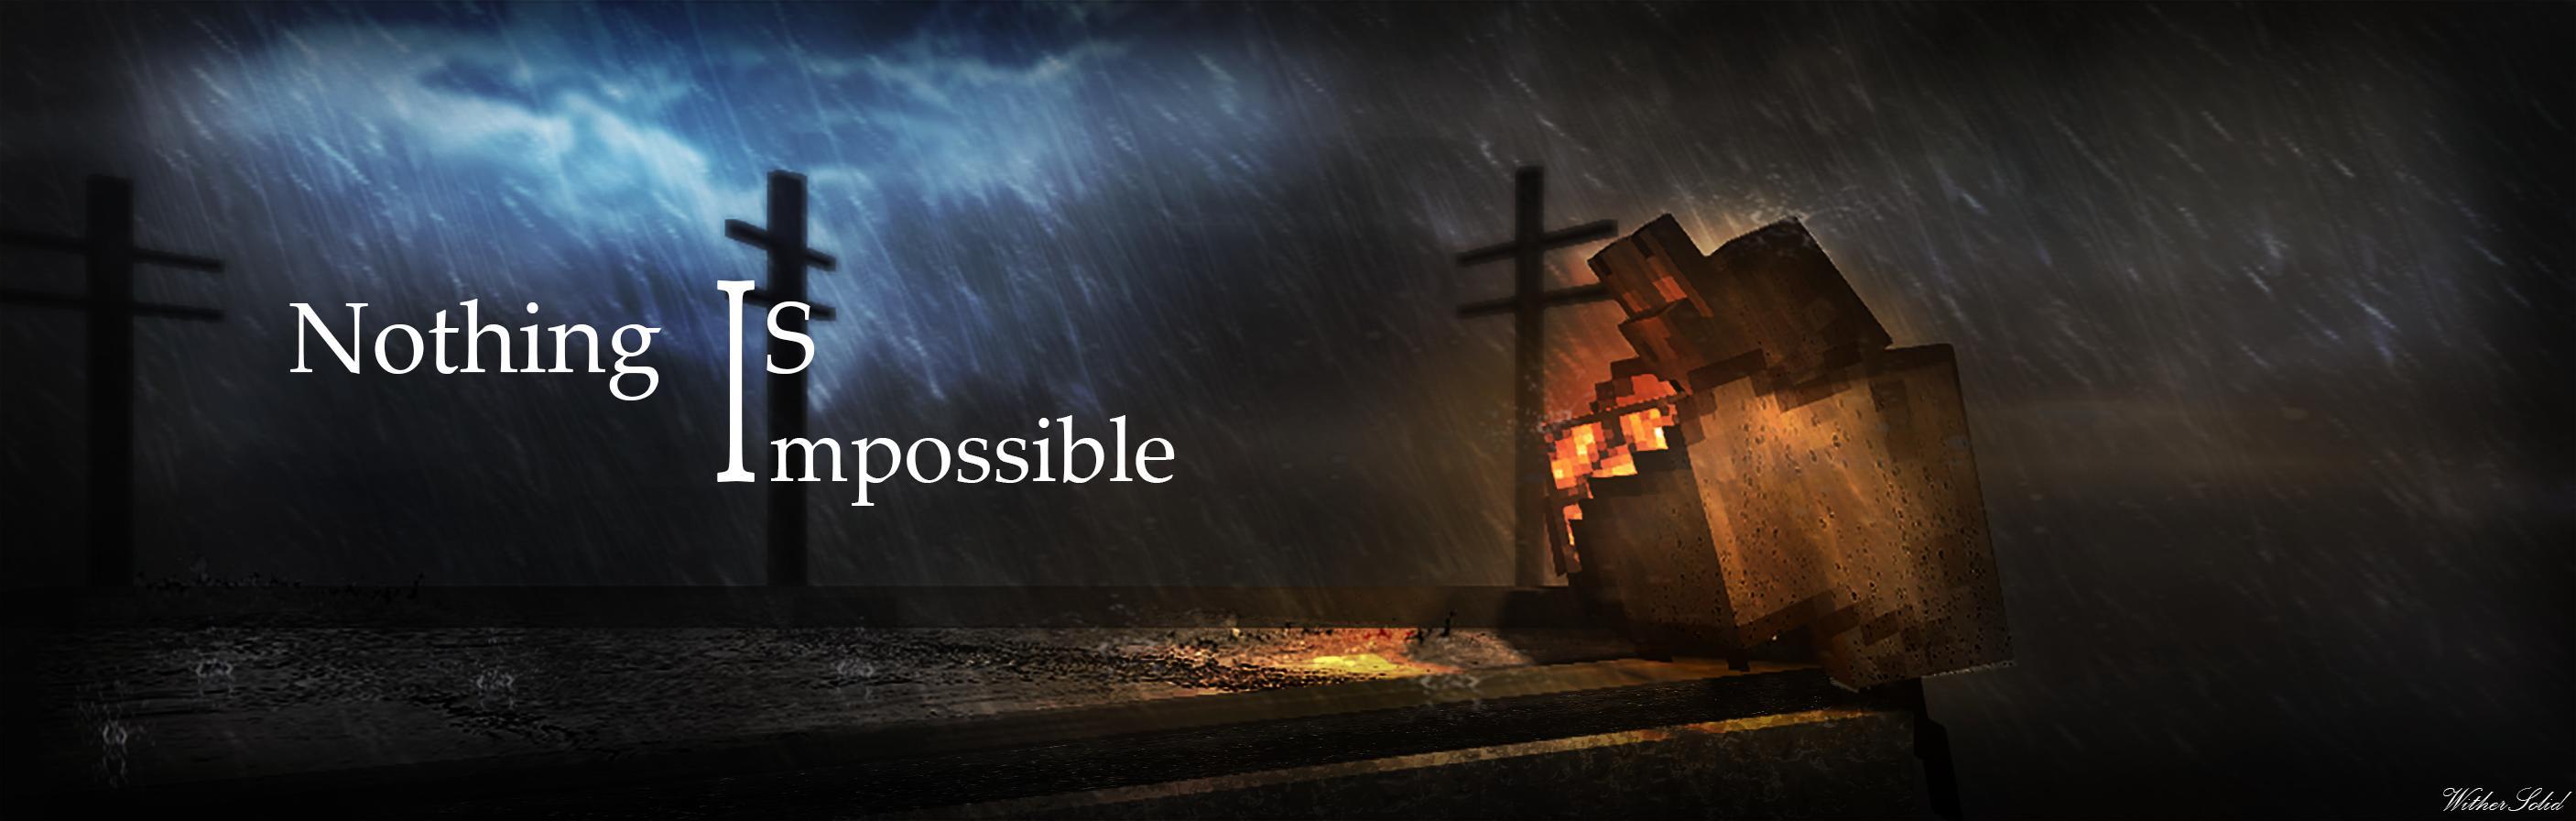 Nothing Is Impossible Wallpaper Cover And Art Imator Forums